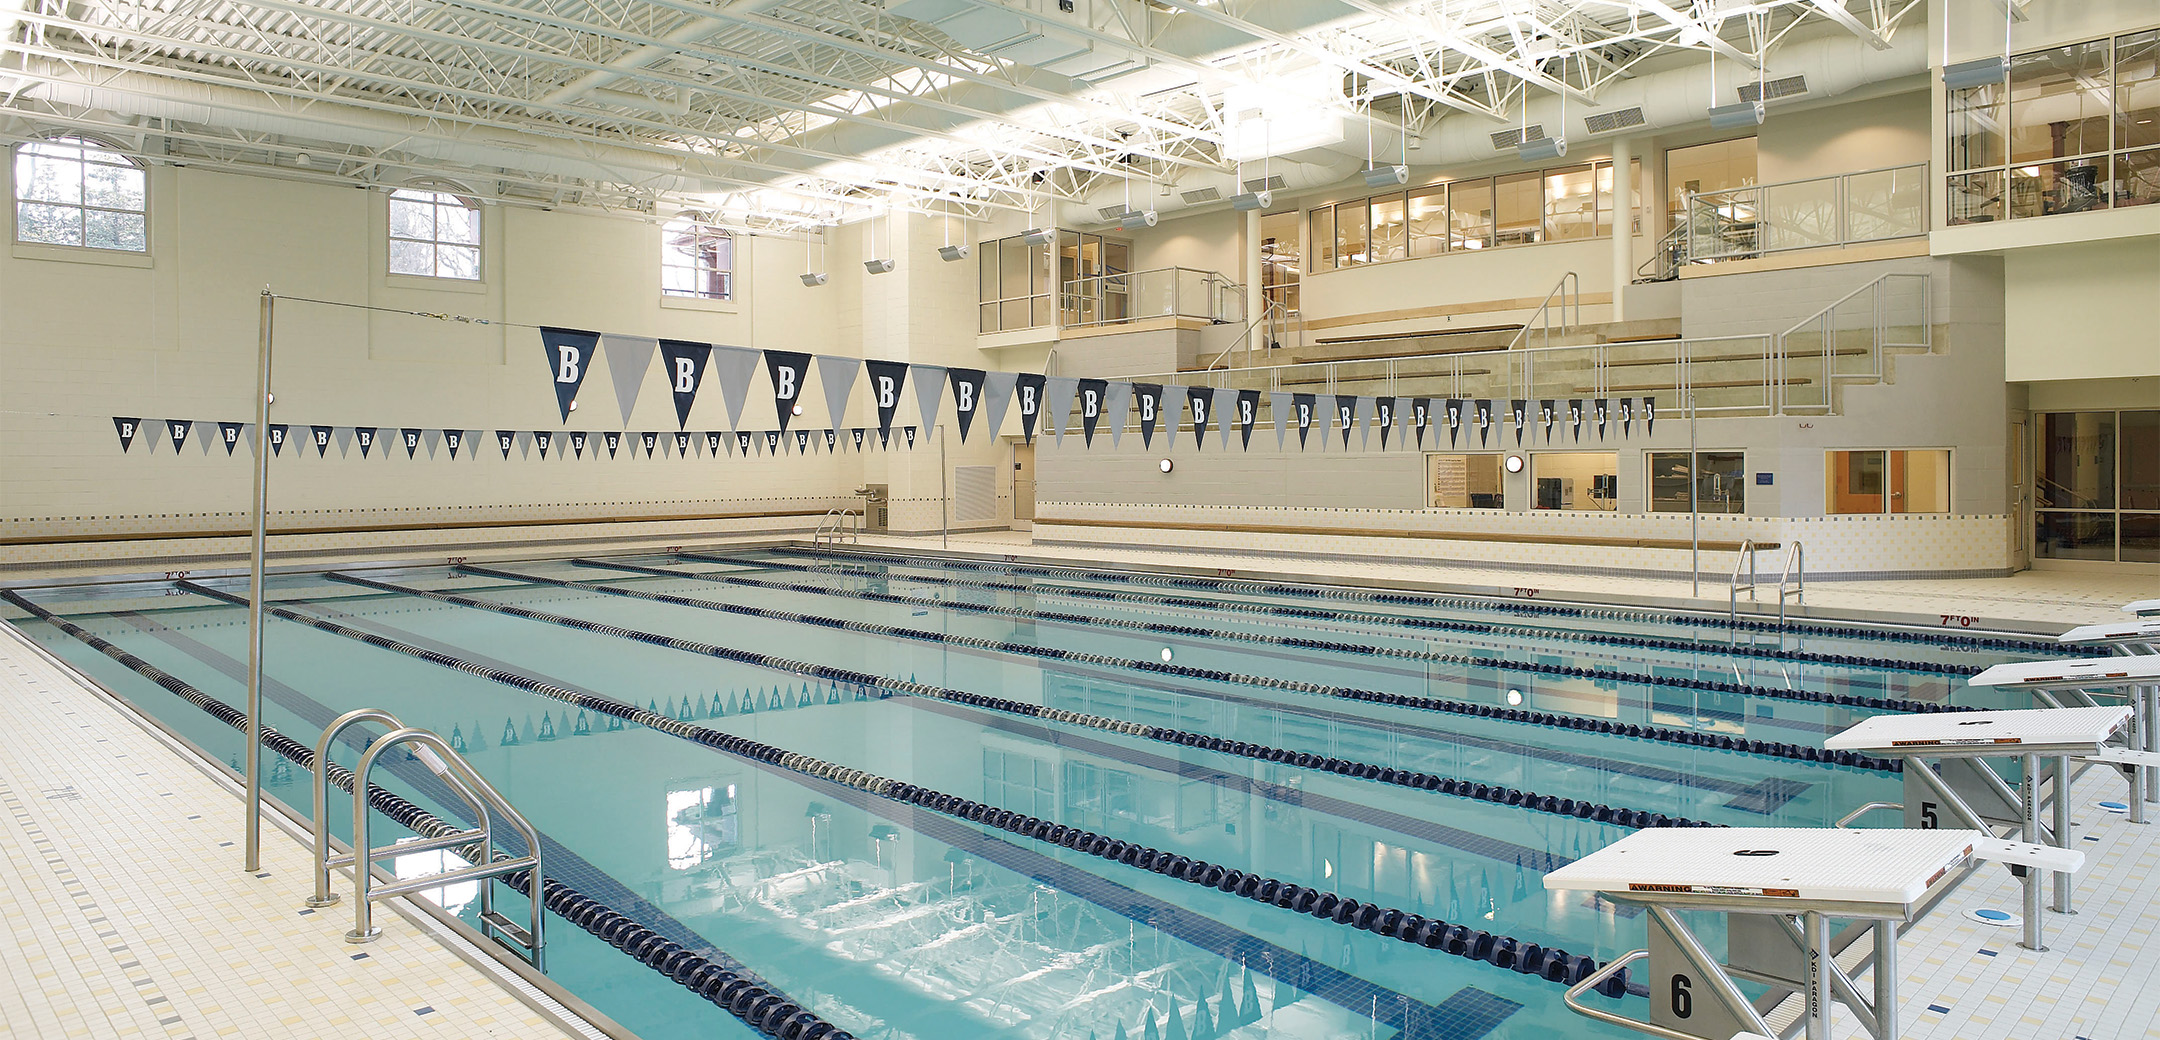 An inner view of the Baldwin School Olympic sized pool with a high well lit ceiling and elevated viewer stands in the background.